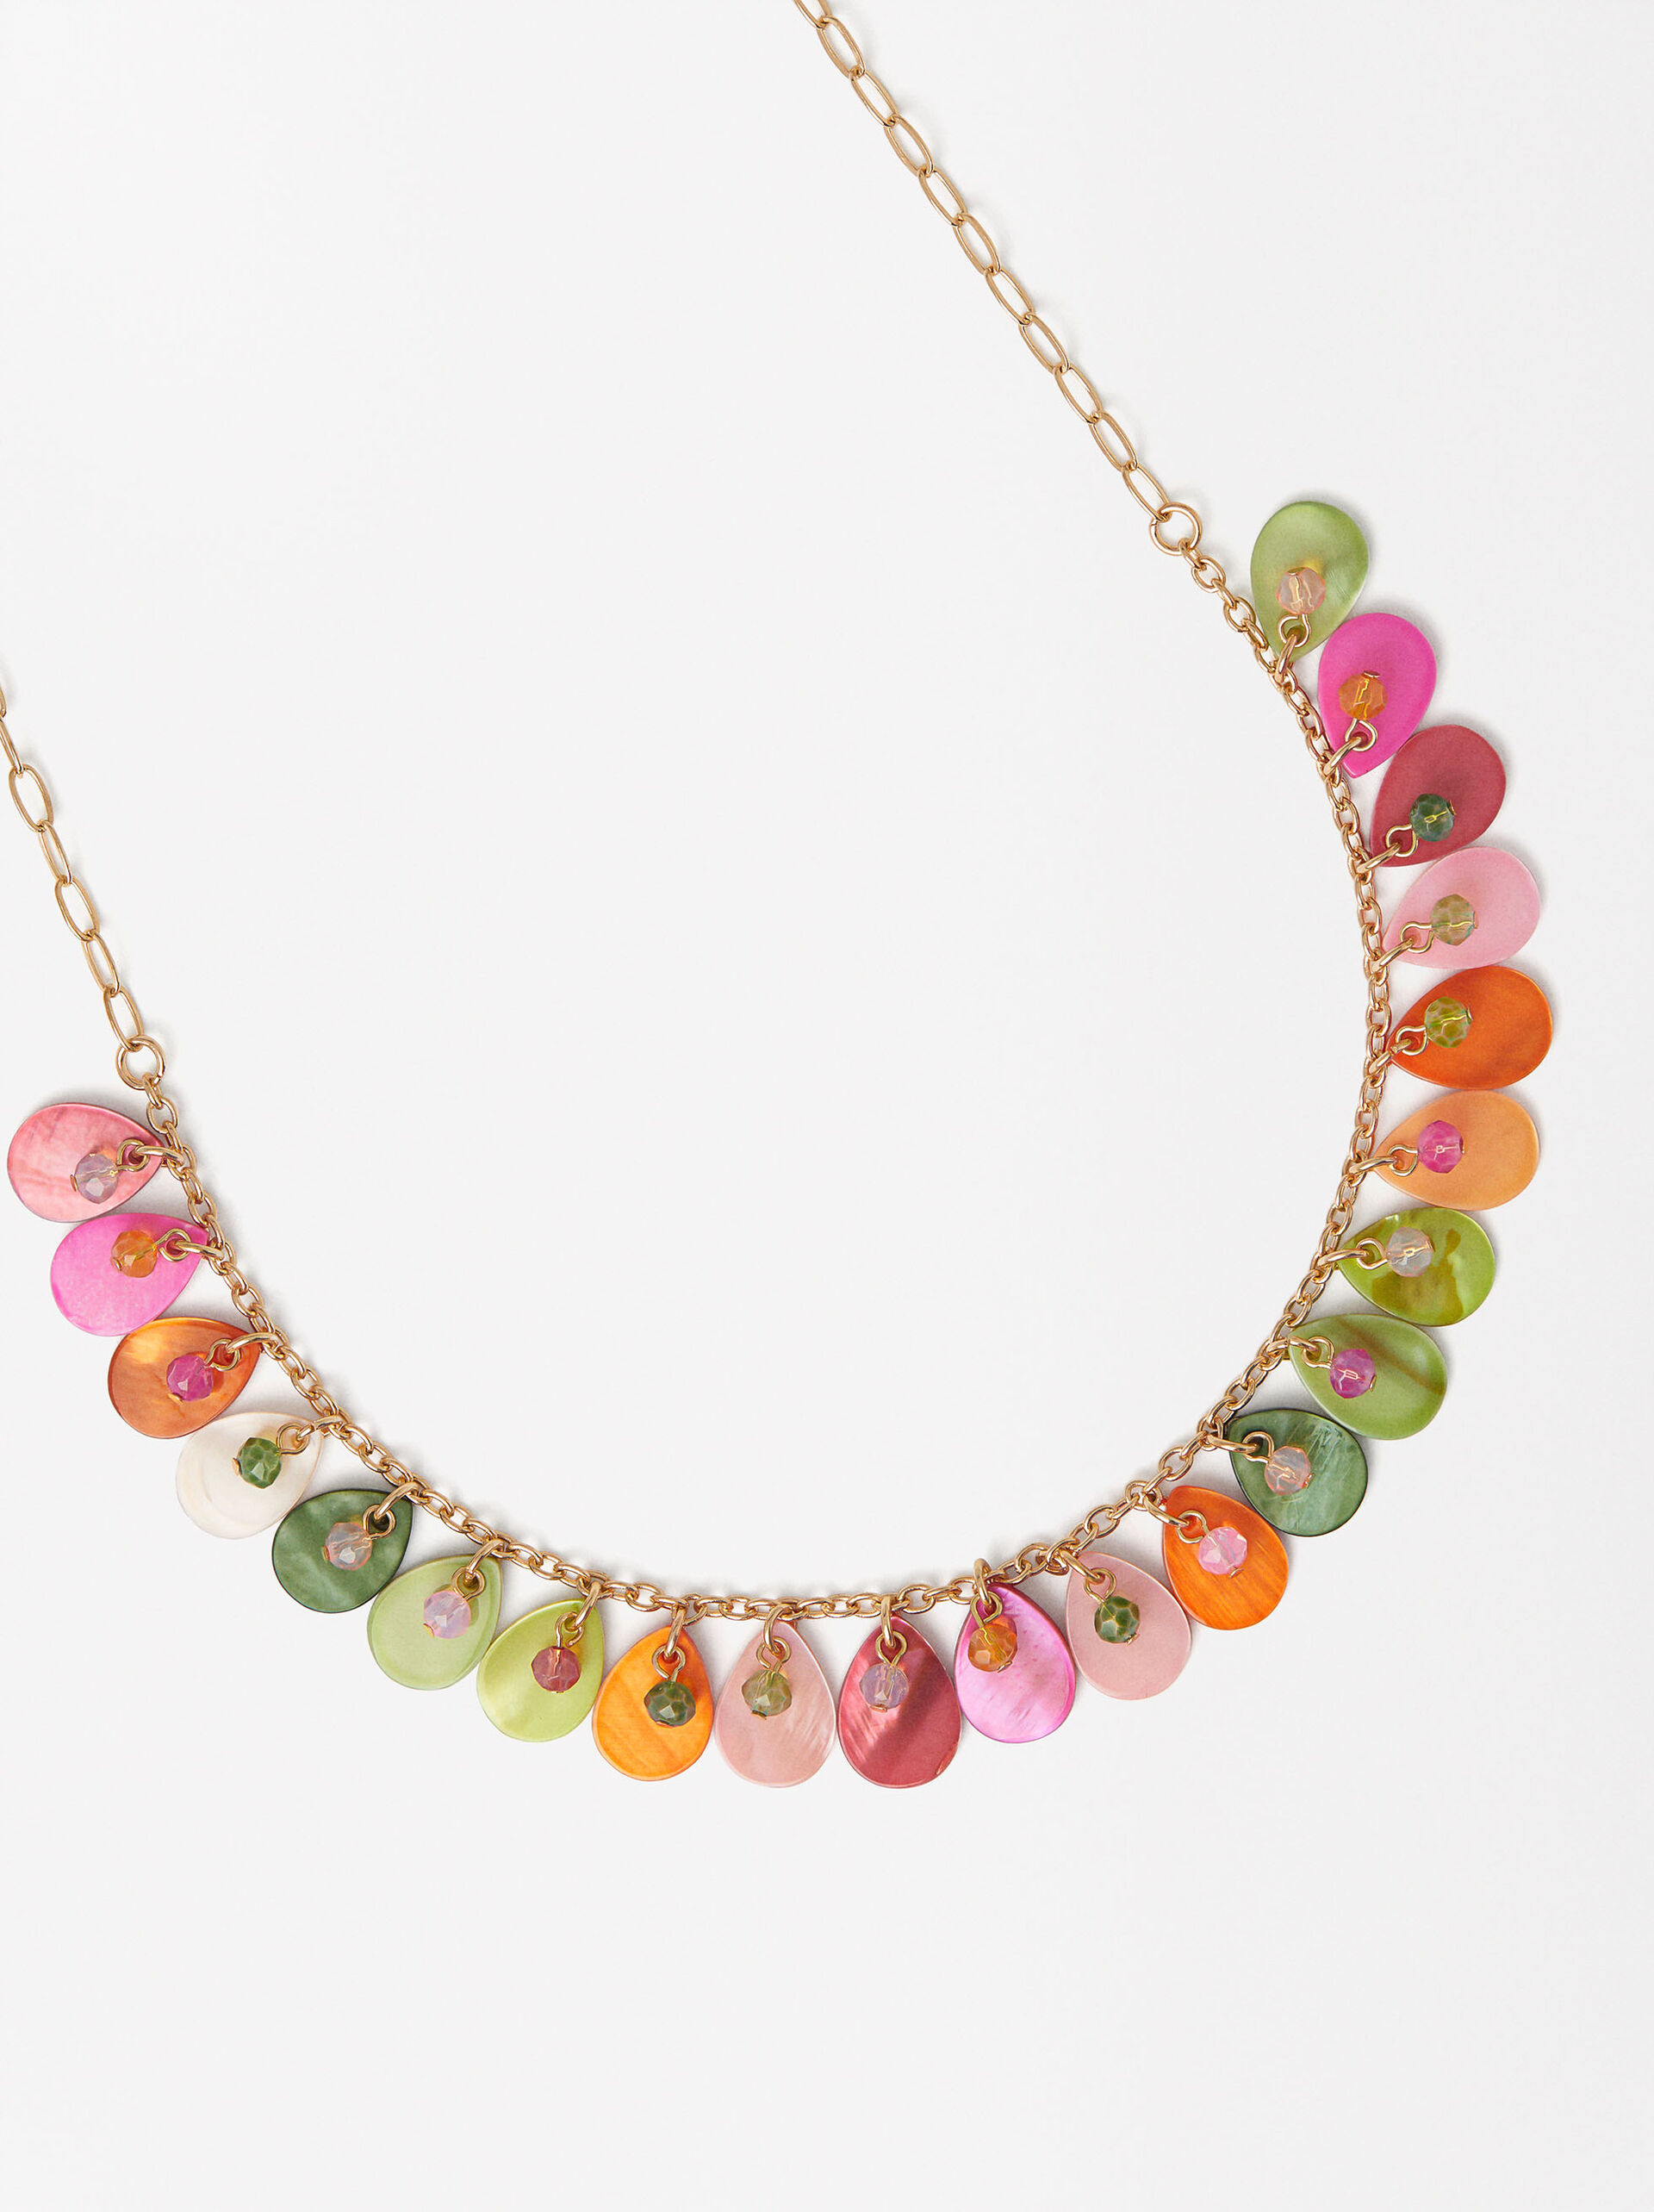 Multicolored Shell Necklace With Crystals image number 1.0